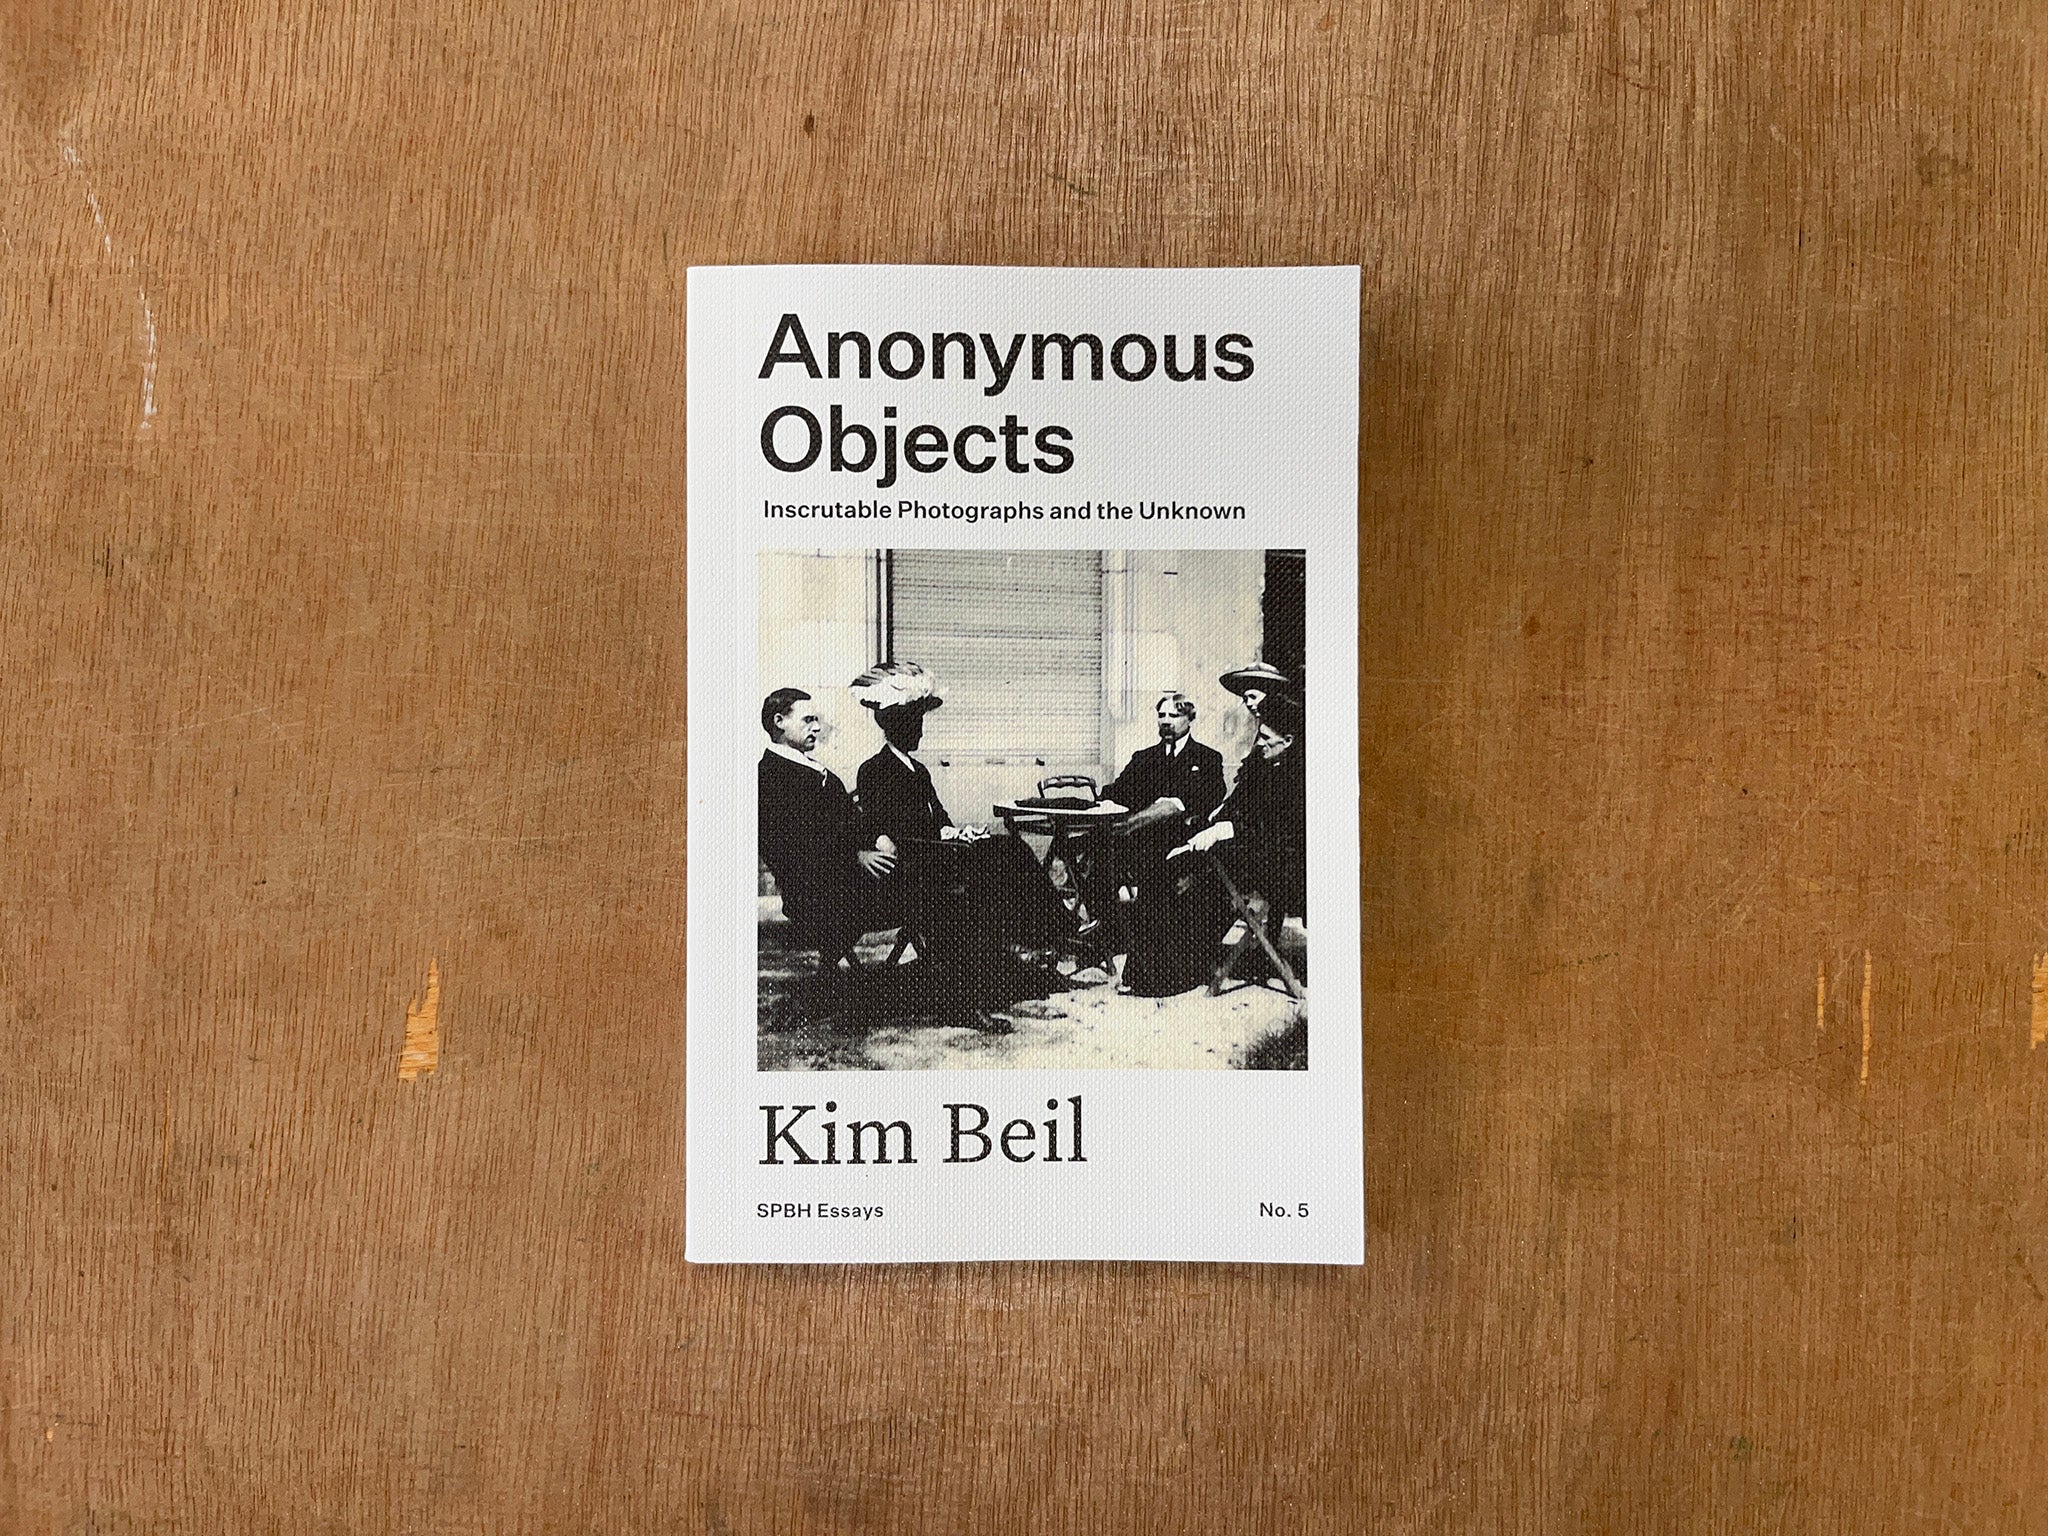 ANONYMOUS OBJECTS: INSCRUTABLE PHOTOGRAPHS AND THE UNKNOWN by Kim Beil